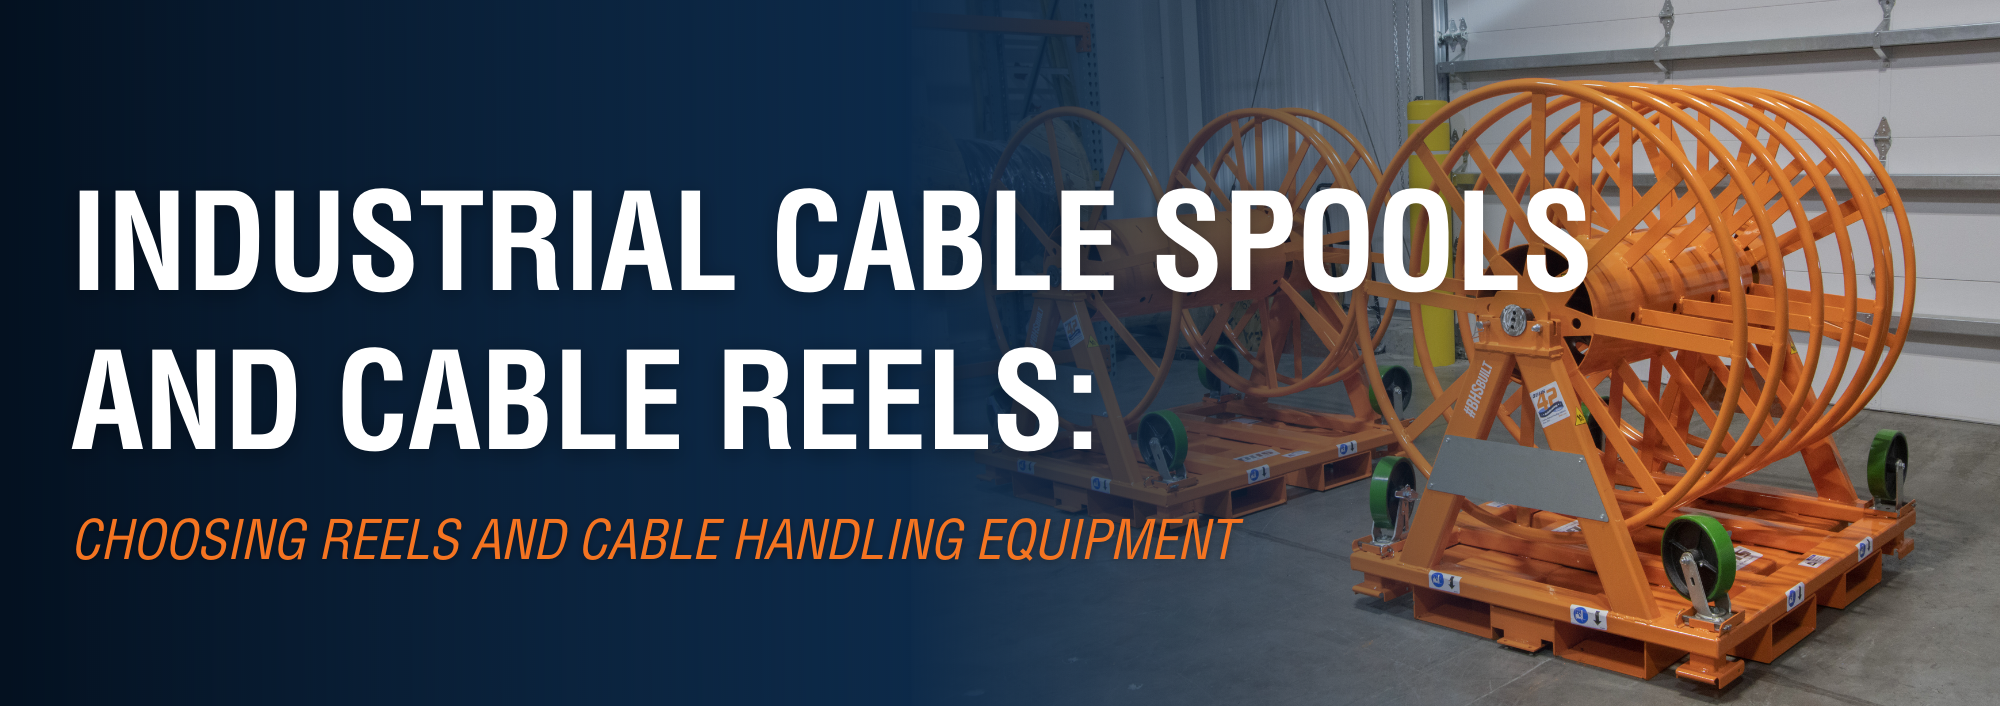 Industrial Cable Spools and Cable Reels: Choosing Reels and Cable Handling Equipment